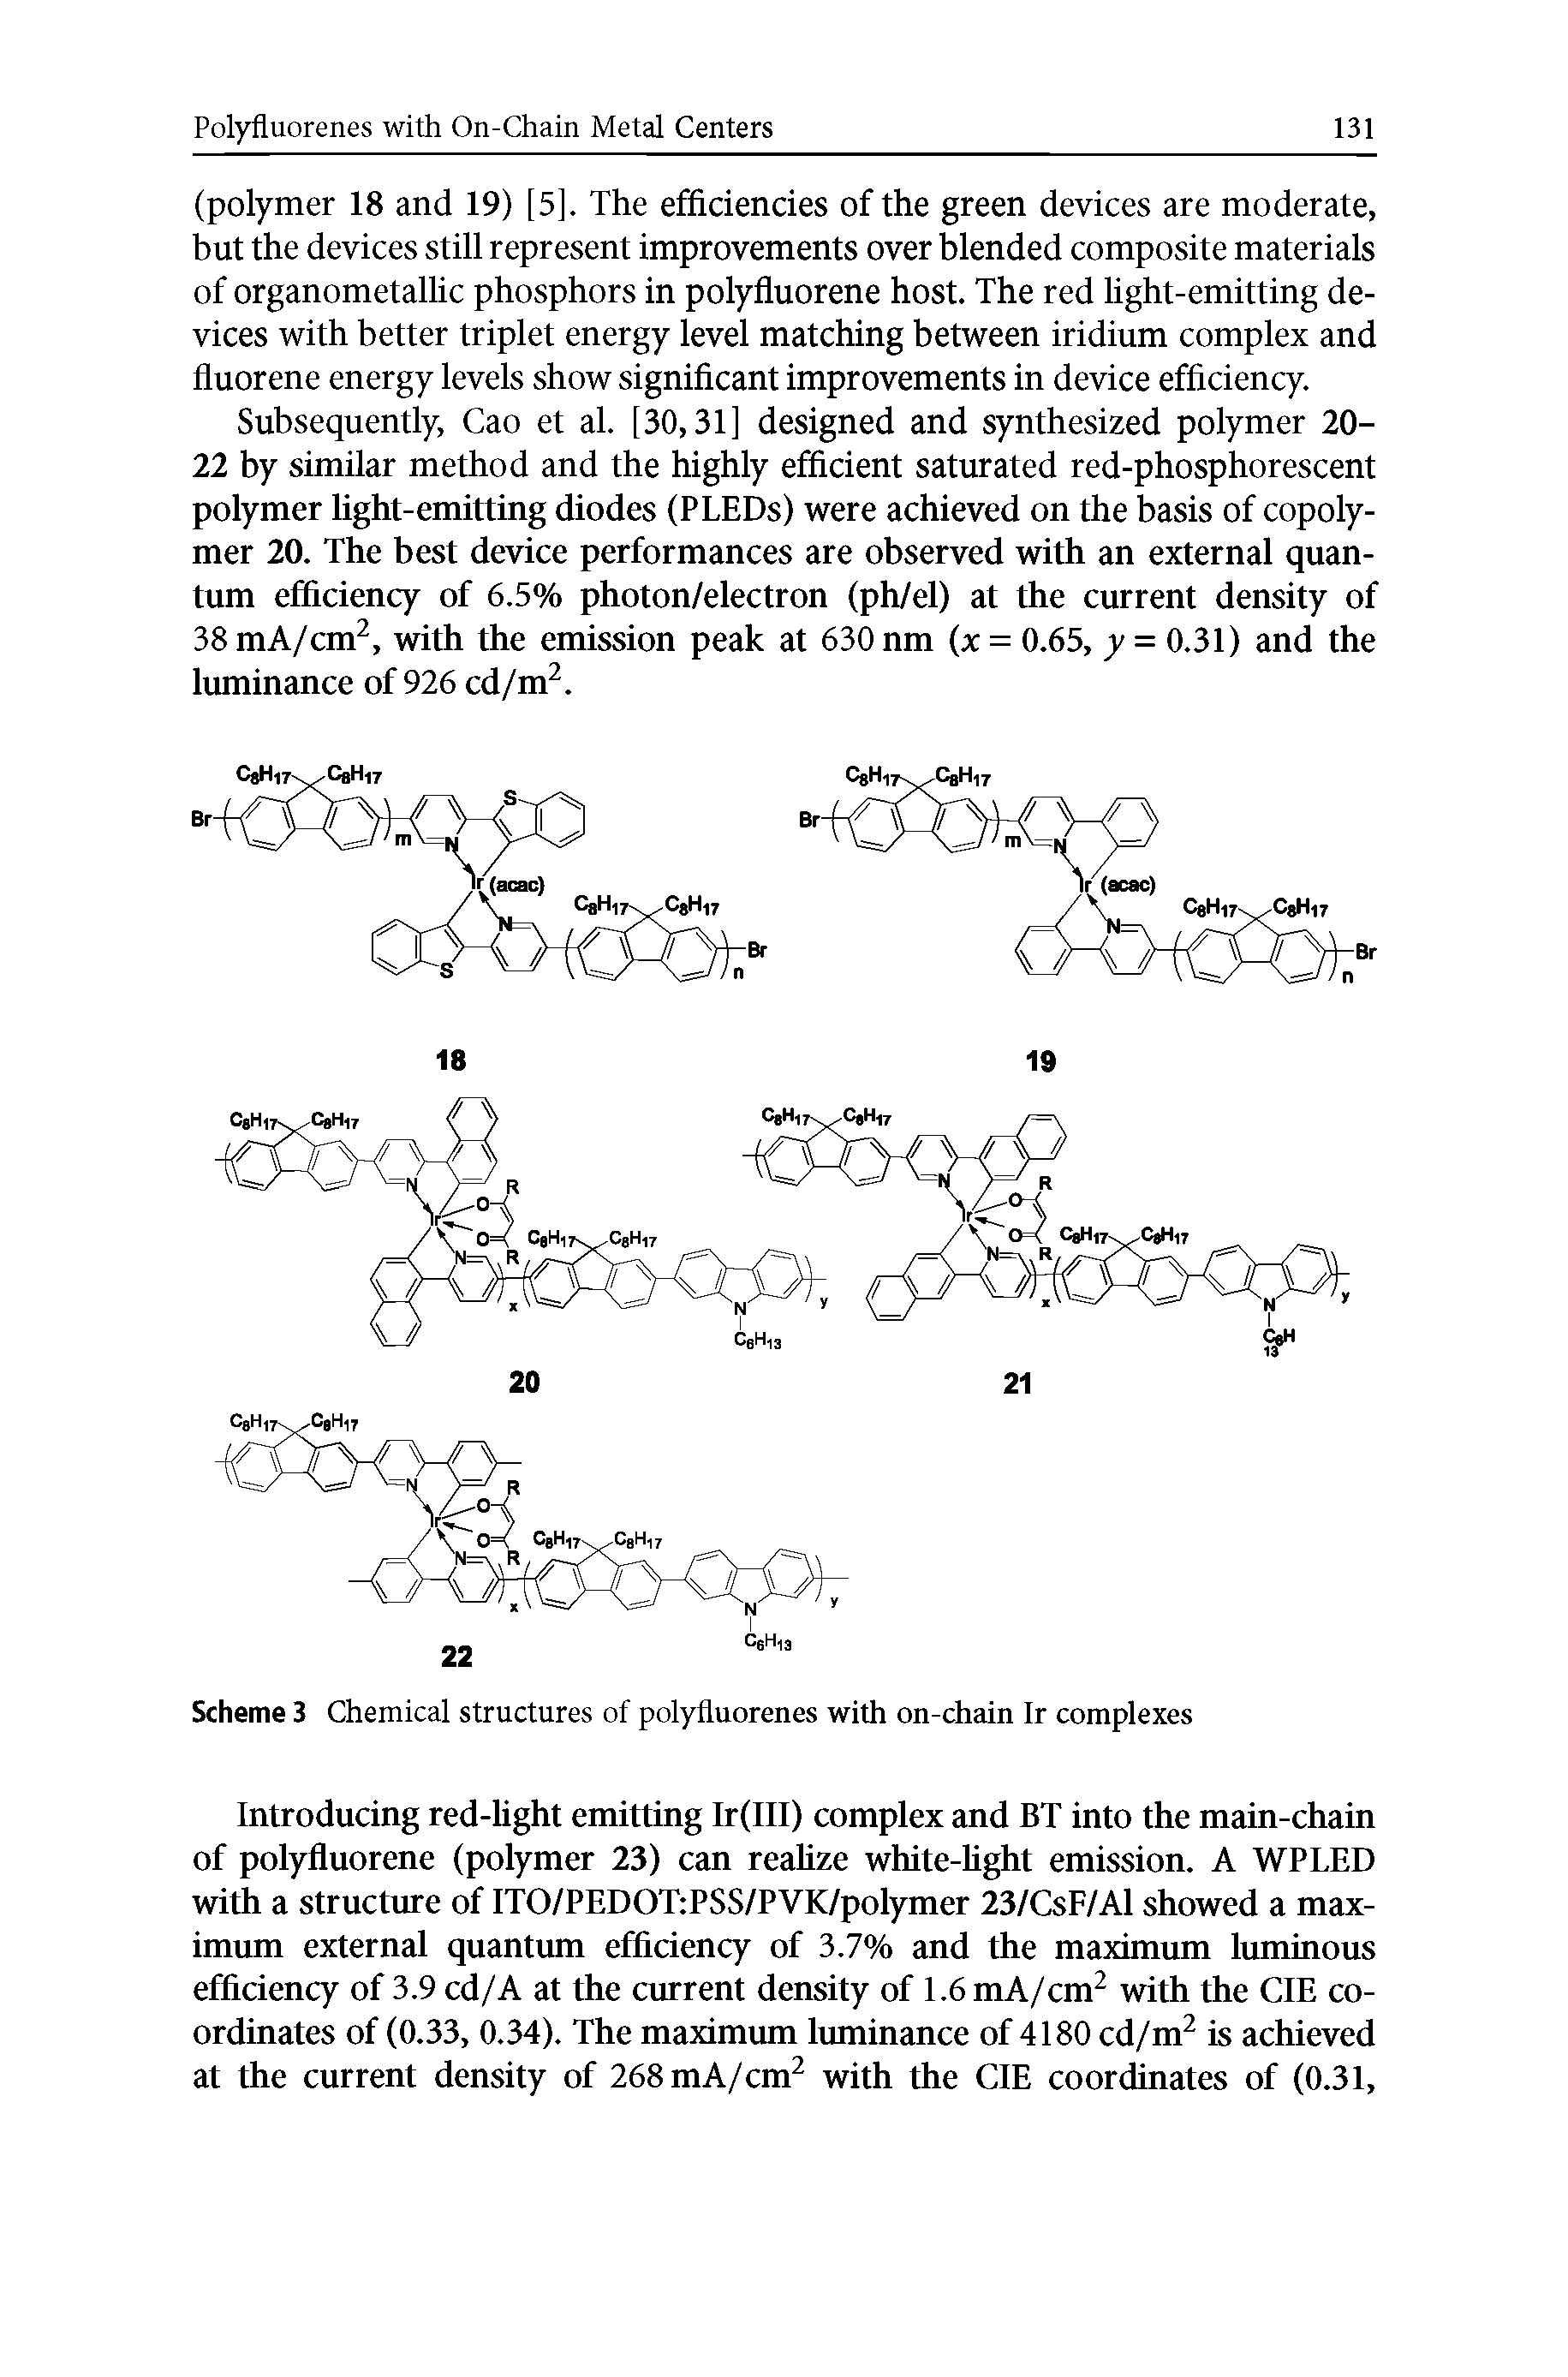 Scheme 3 Chemical structures of polyfluorenes with on-chain Ir complexes...